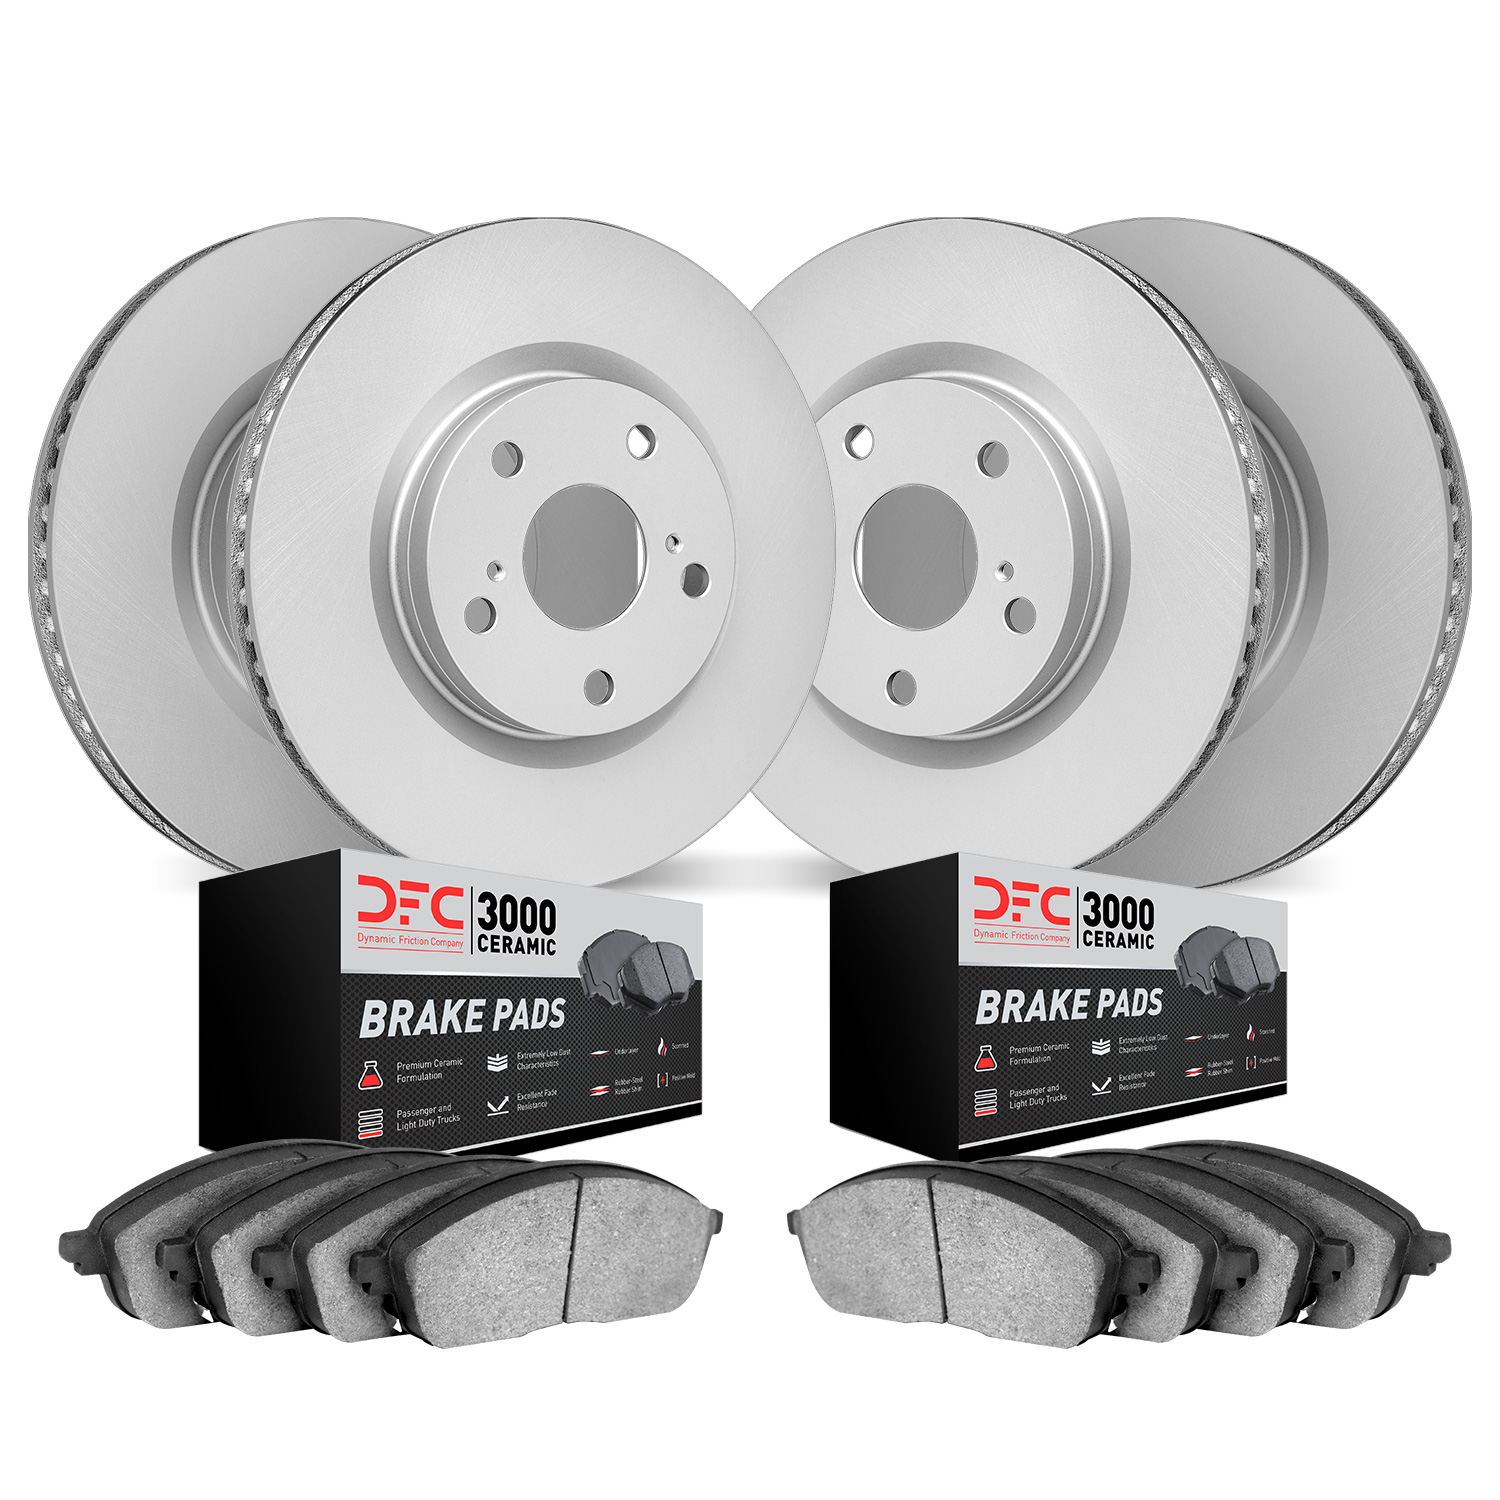 4304-75005 Geospec Brake Rotors with 3000-Series Ceramic Brake Pads Kit, 1995-2000 Lexus/Toyota/Scion, Position: Front and Rear